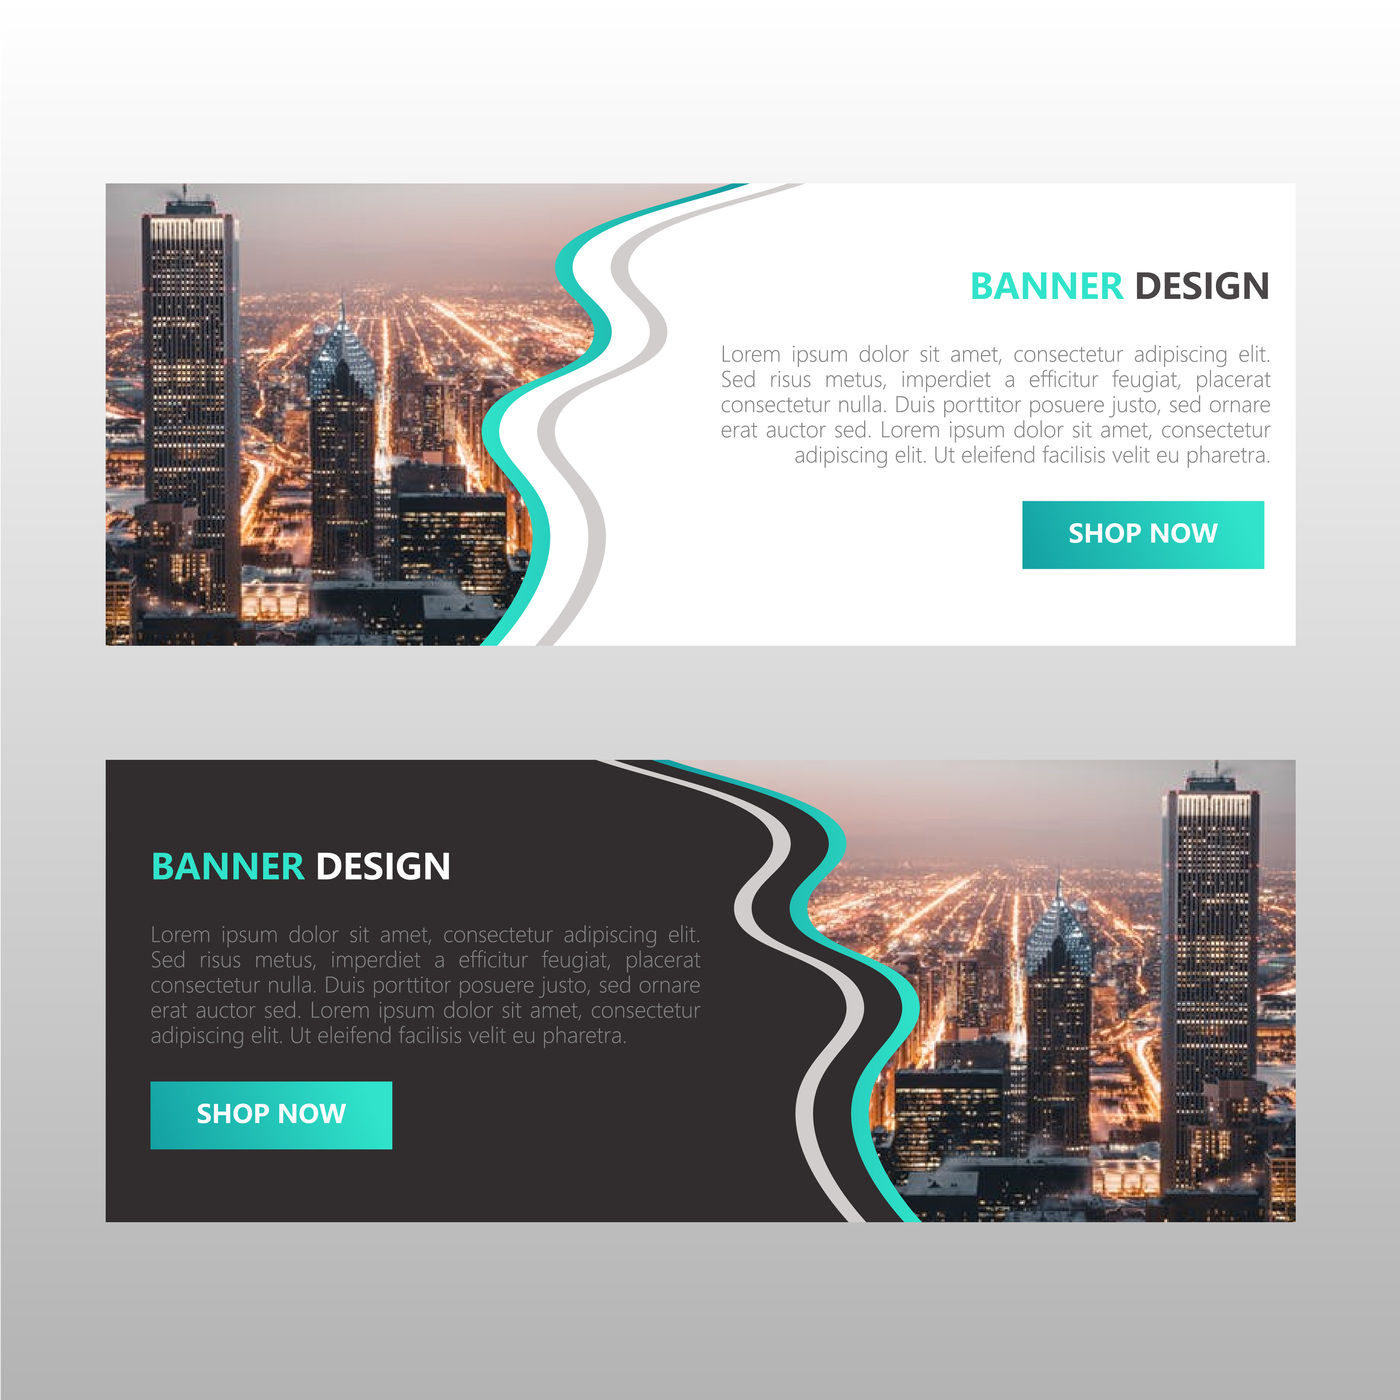 Creative Web Store Banner Template By CreativeDesign ...